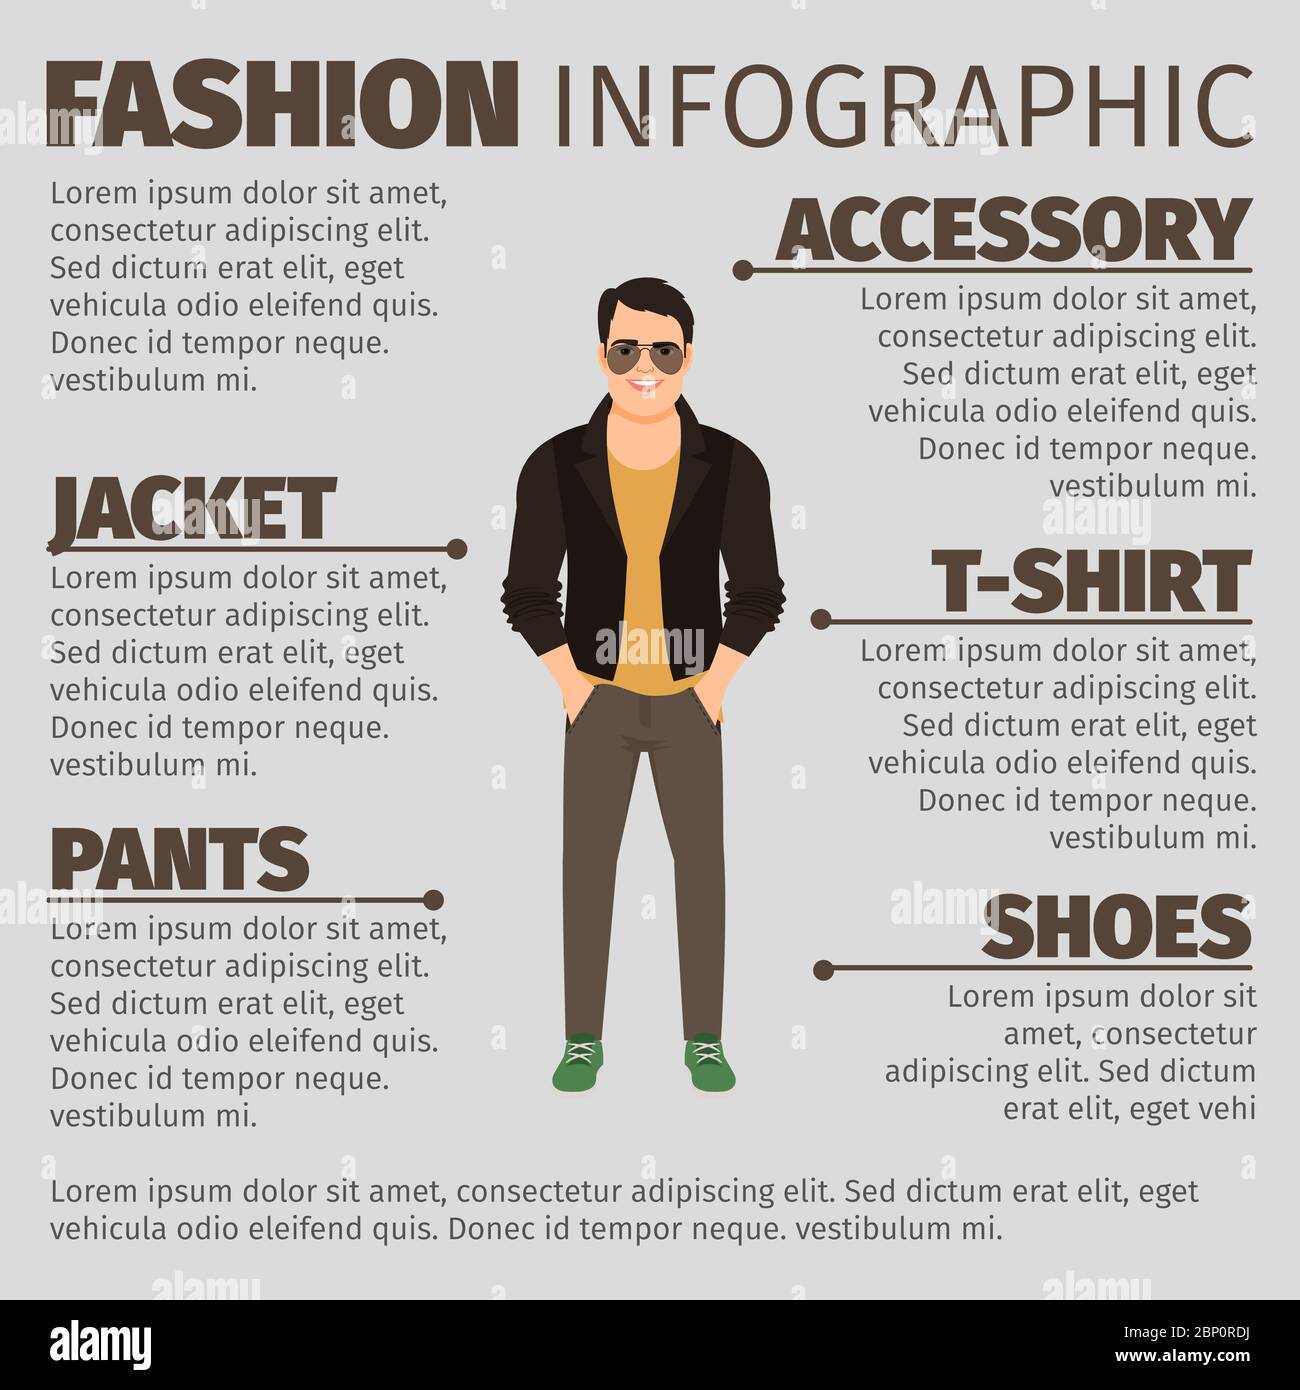 Fashion infographic with man in leather jacket. Vector illustration Stock Vector